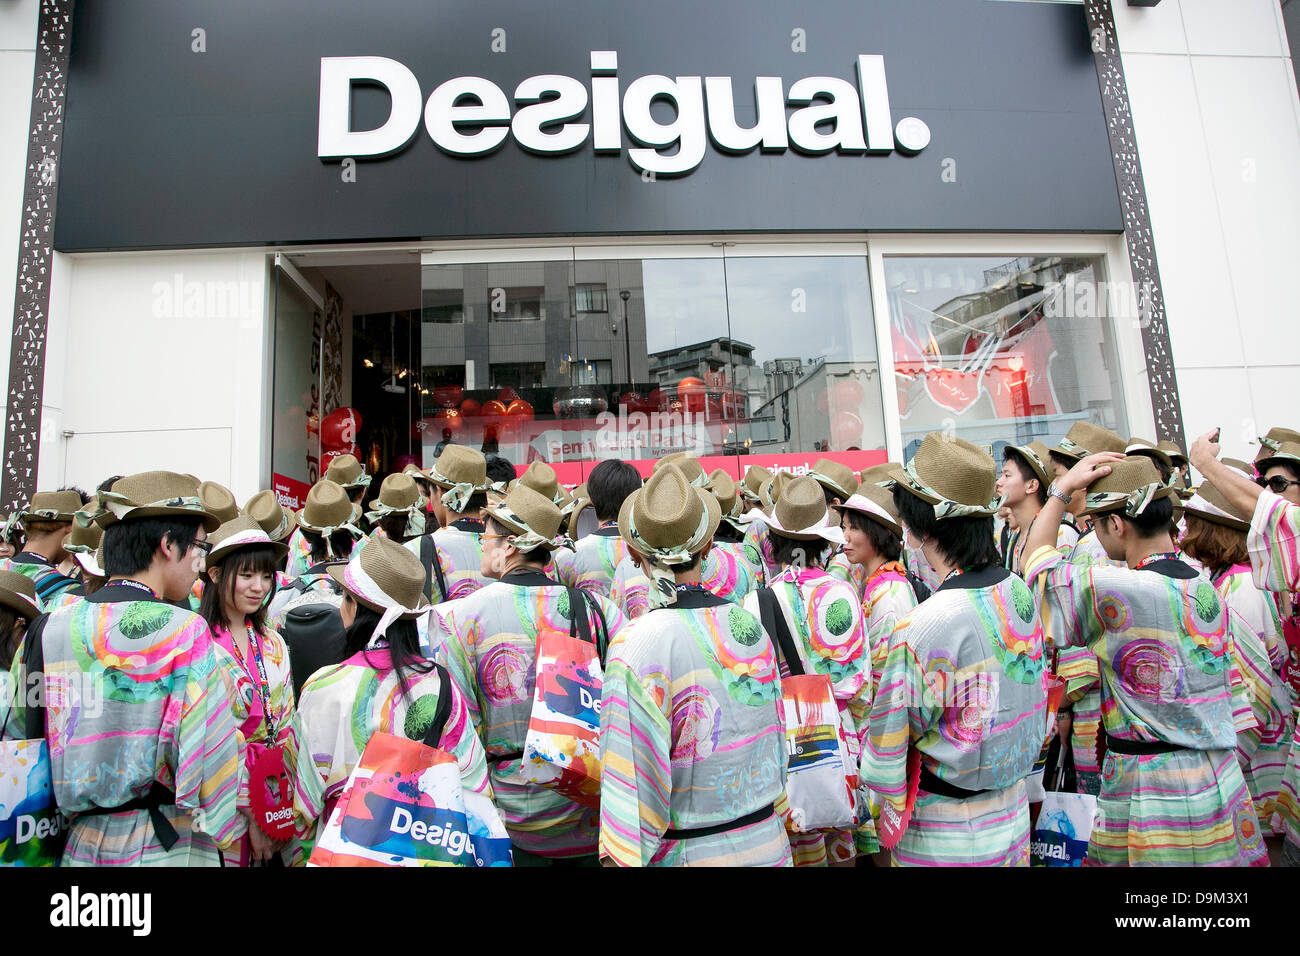 Tokyo, Japan. 22nd June 2013. Customers wait outside the Desigual store  during the grand opening in Tokyo's Harajuku fashion district. A fashion  chain called "Seminaked Party by Desigual" offers the first 100